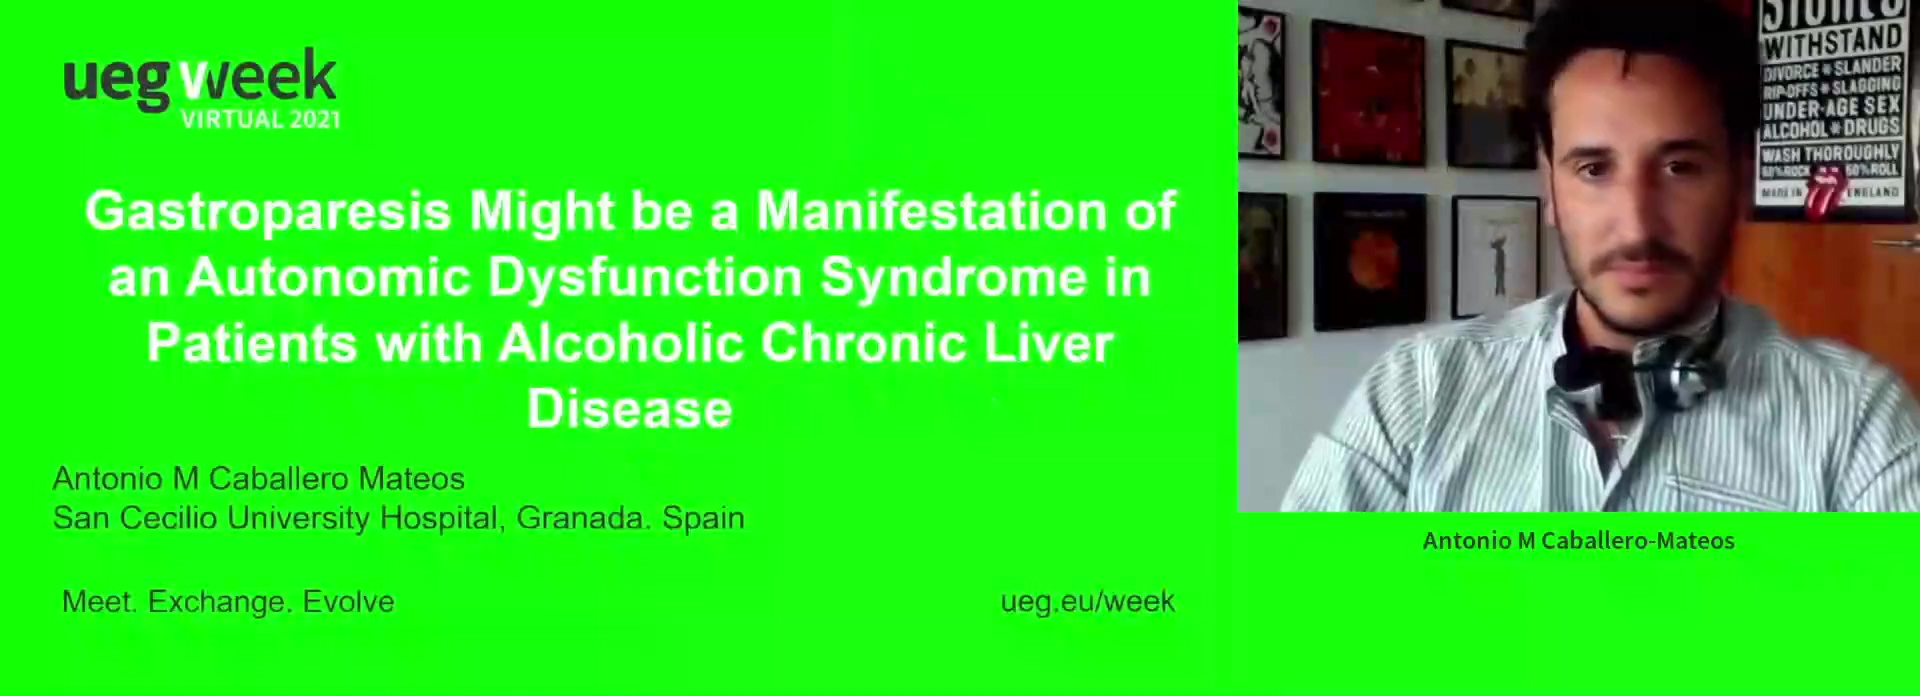 GASTROPARESIS MIGHT BE A MANIFESTATION OF AN AUTONOMIC DYSFUNCTION SYNDROME IN PATIENTS WITH ALCOHOLIC CHRONIC LIVER DISEASE